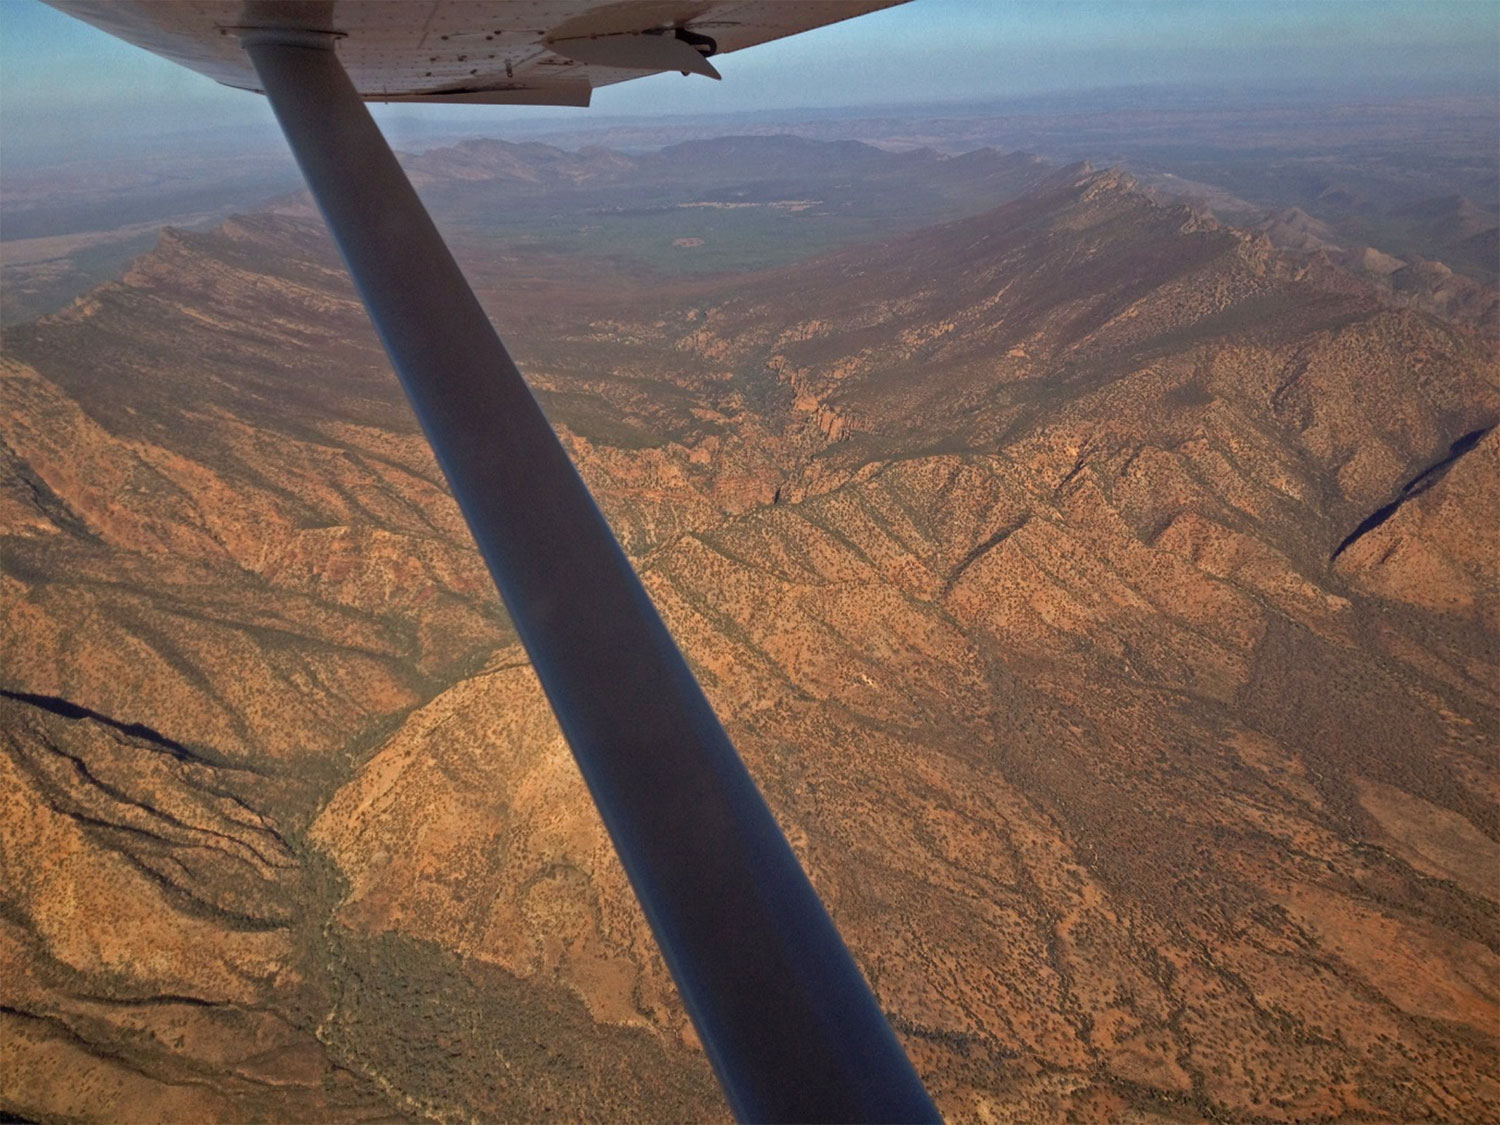 Wilpena Pound in the Flinders Ranges – rugged, and where are those 6 other aircraft?